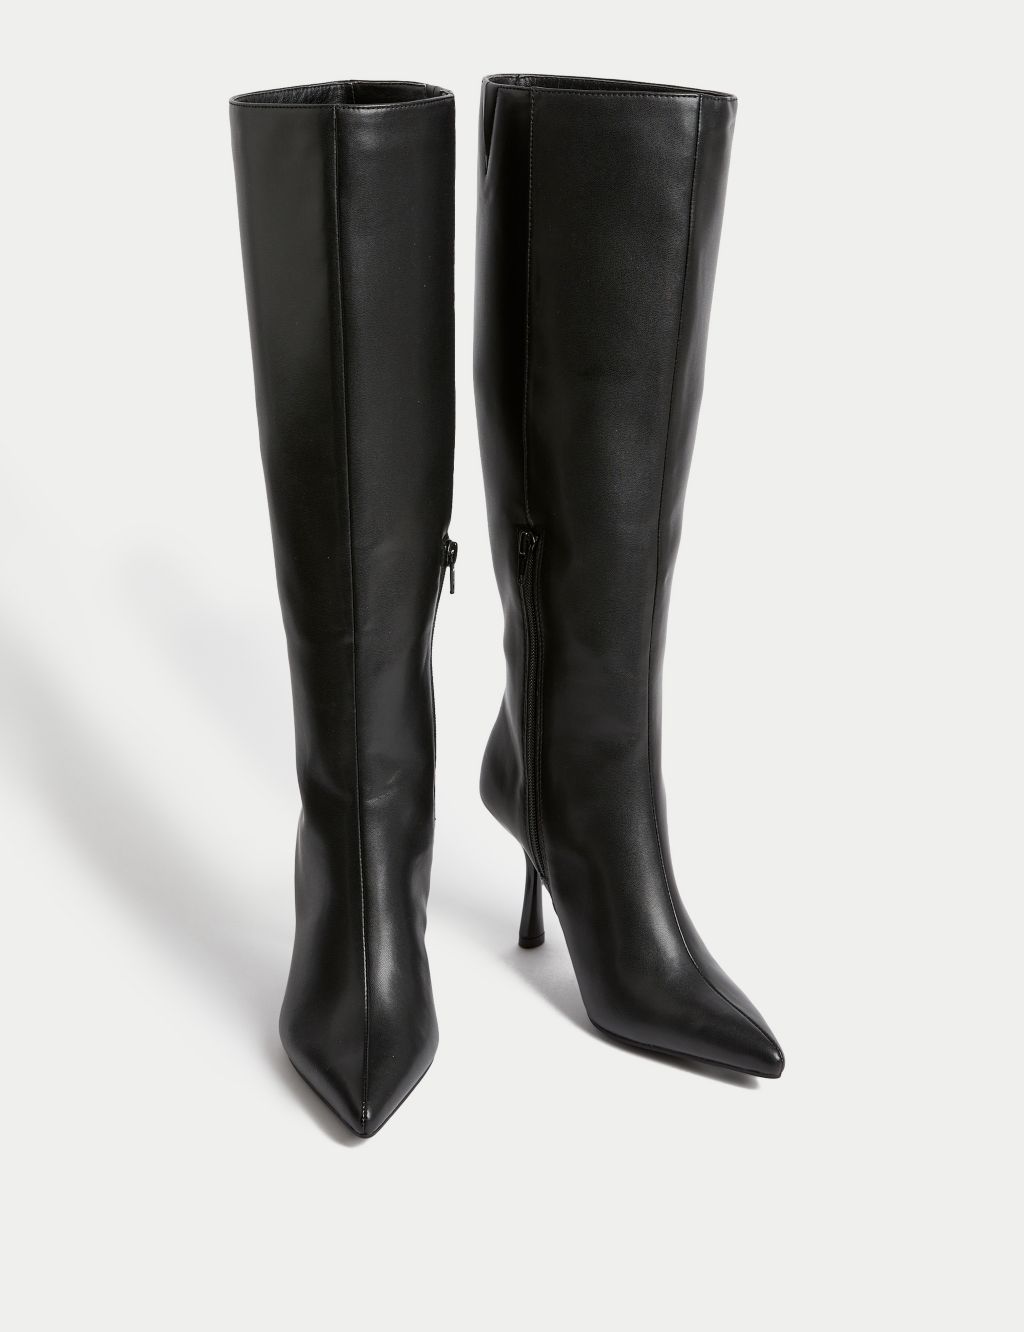 Stiletto Heel Pointed Knee High Boots image 2